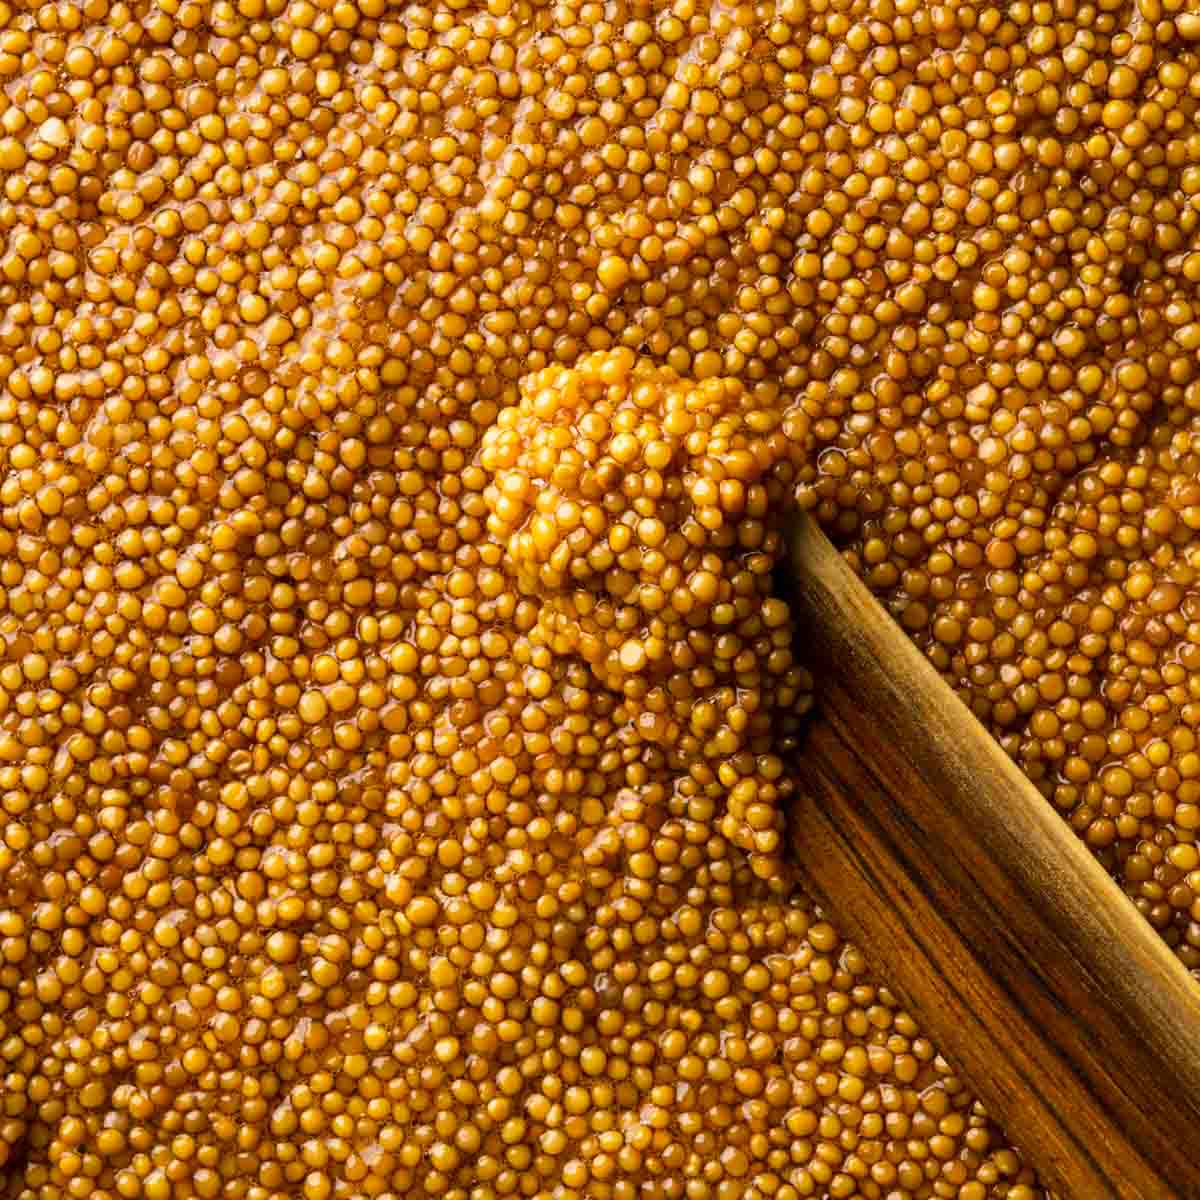 A close-up shot of yellow pickled mustard seeds with a wooden spreader